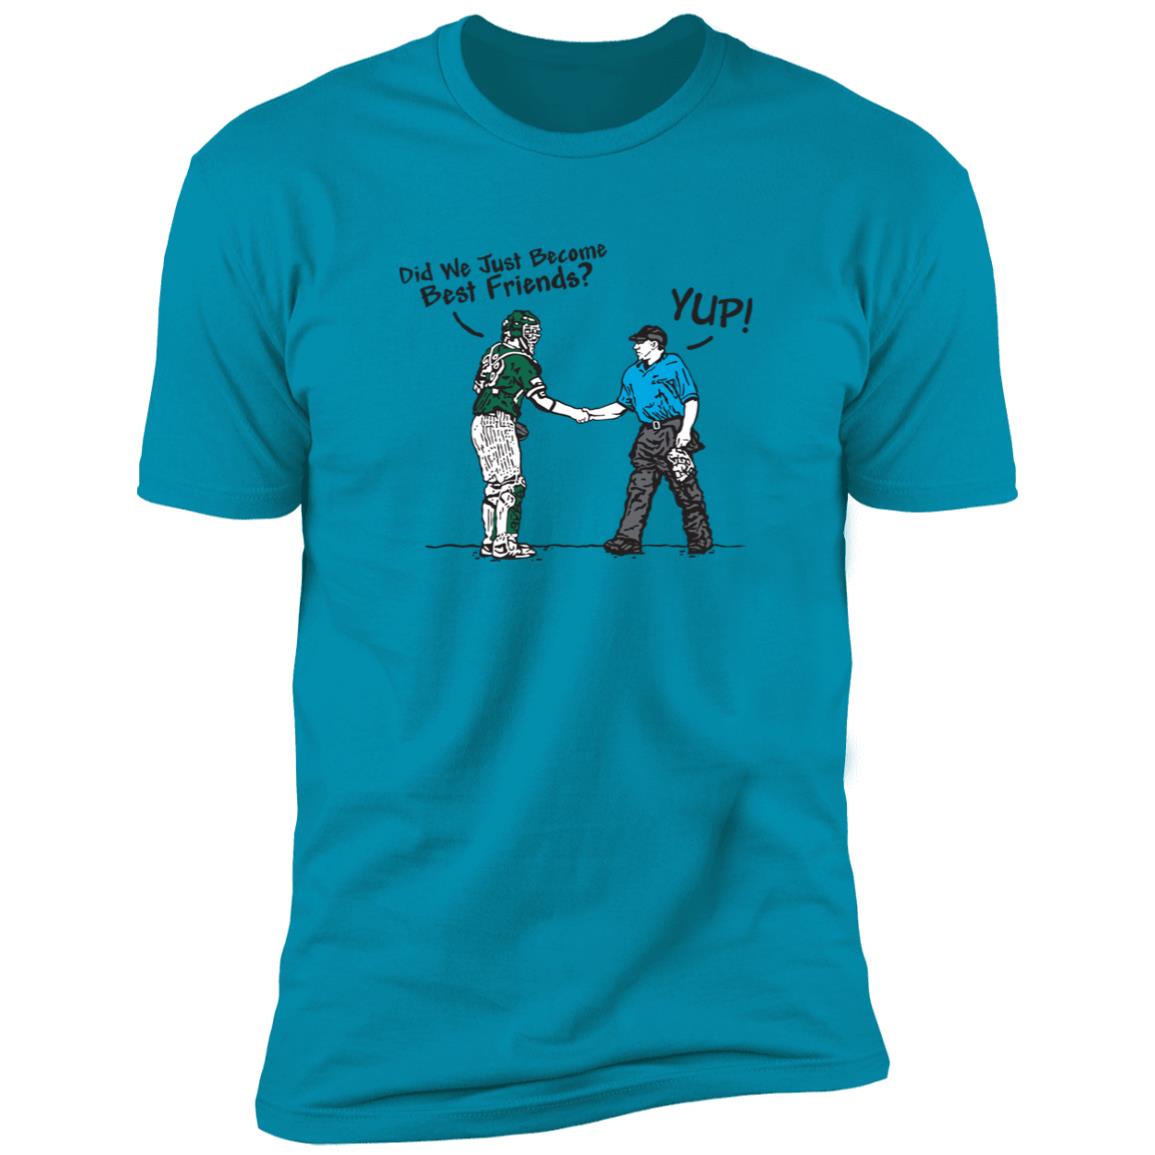 The Catching Guy Best Friends Tee blue